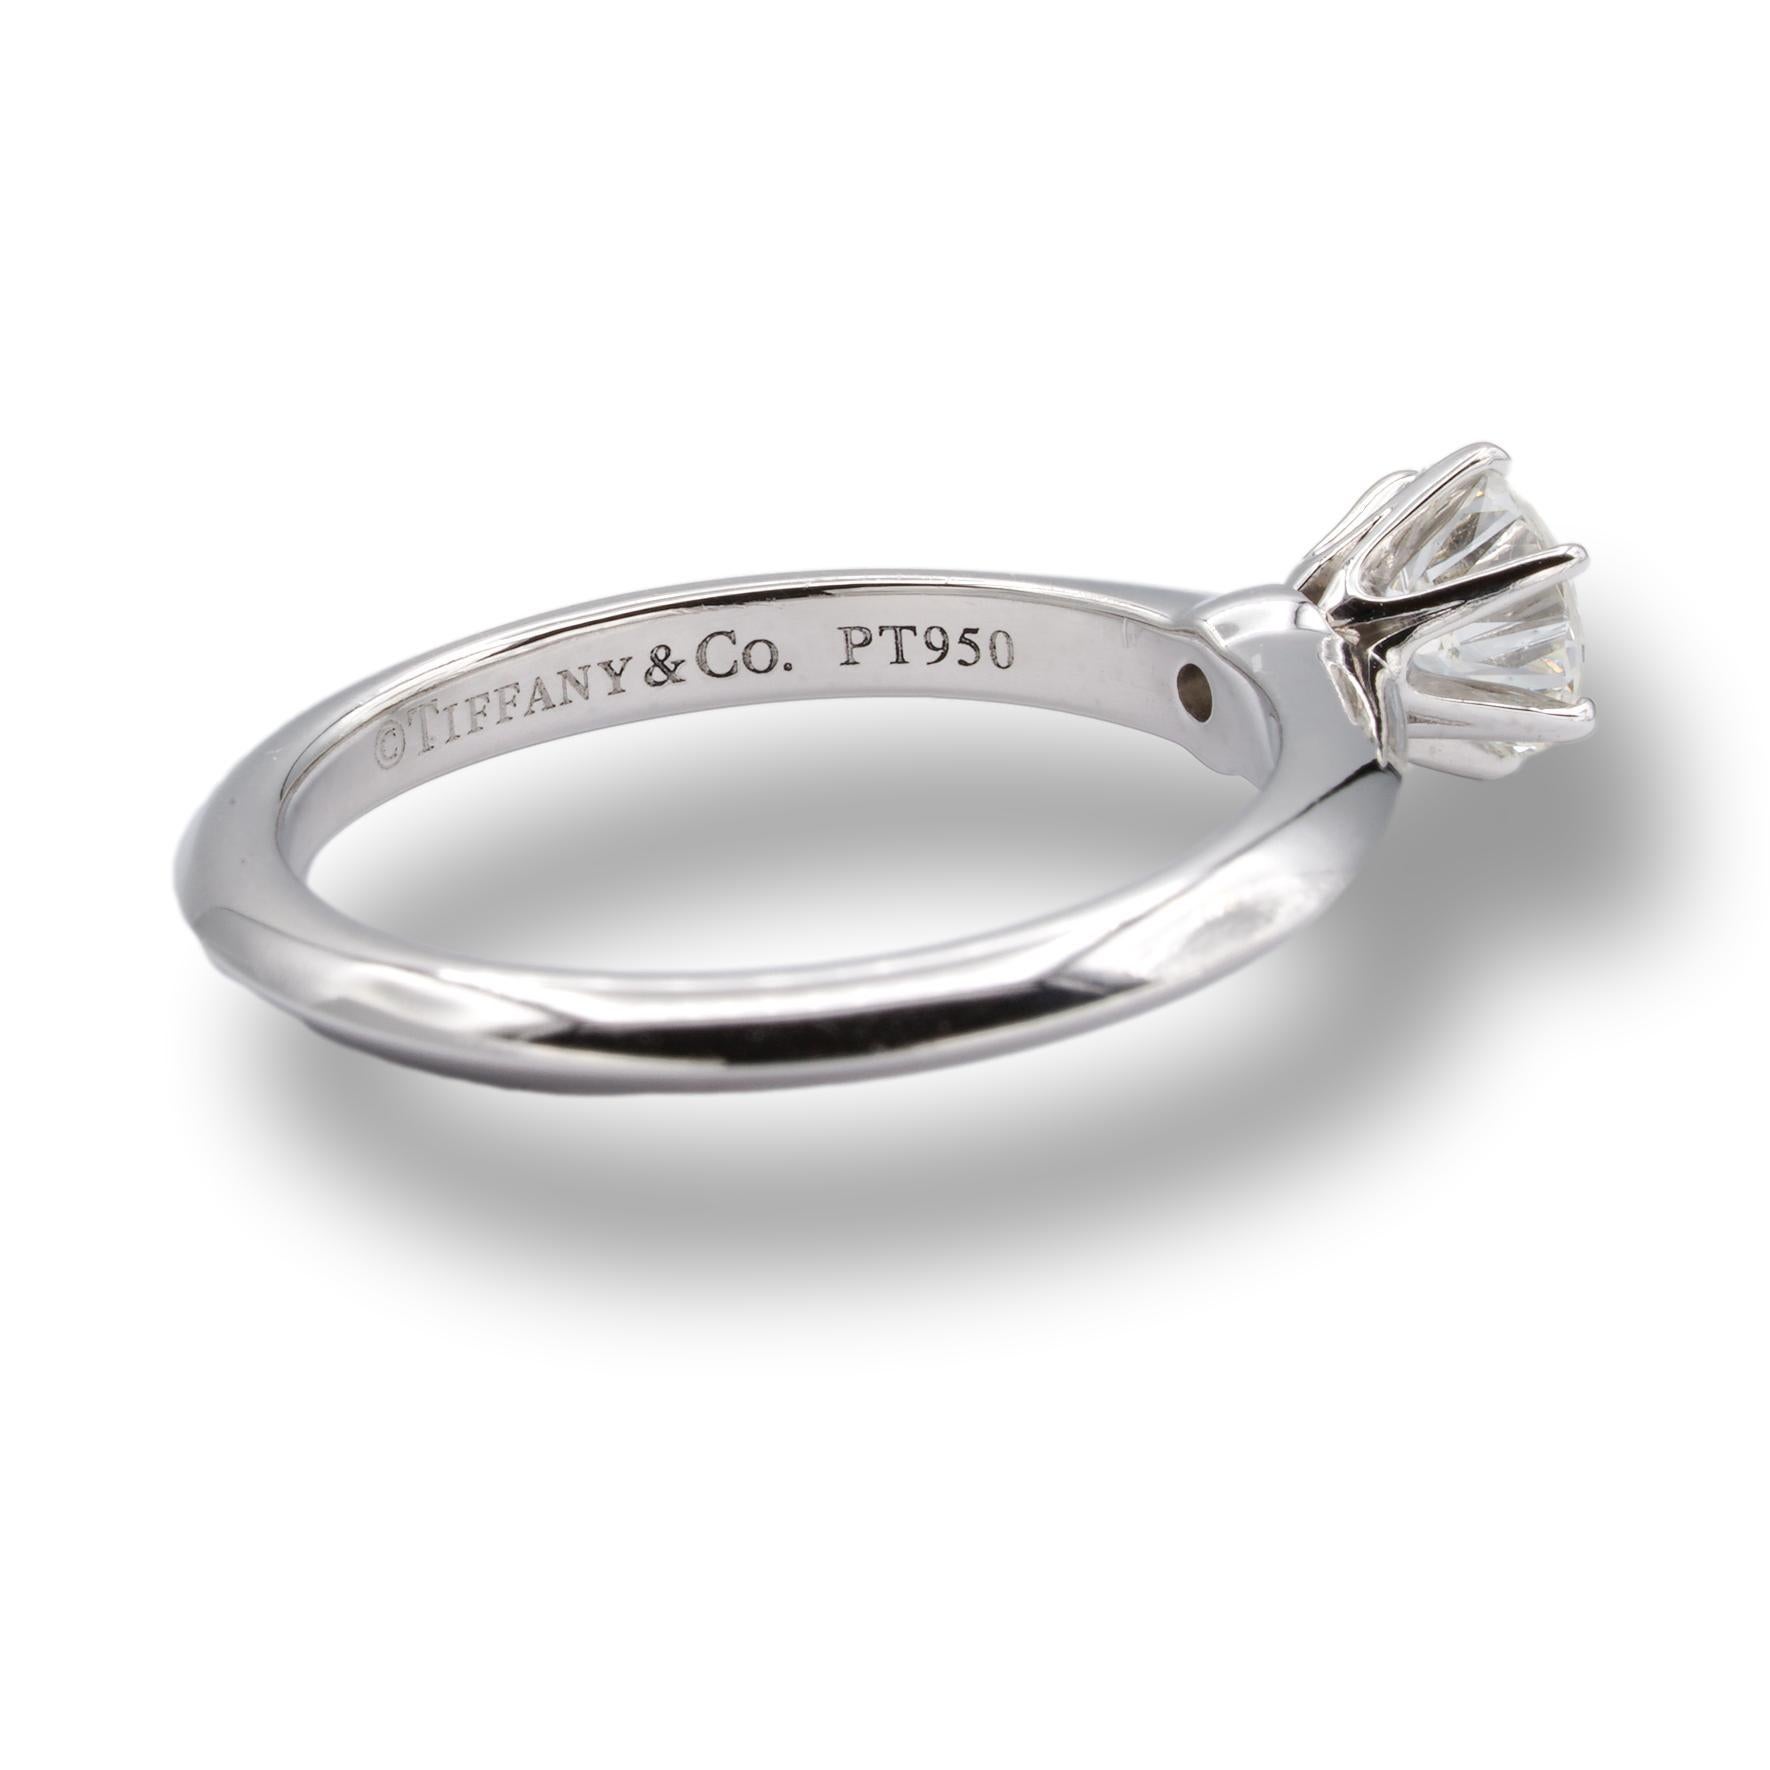 Tiffany & Co Round Brilliant Solitaire Engagement Ring featuring a 0.53 ct Center H color, VVS1 clarity, finely crafted in a 6 prong Platinum Mounting. ( Current Retail for $5,600)This diamond Includes a GIA certificate with report number 2215486409